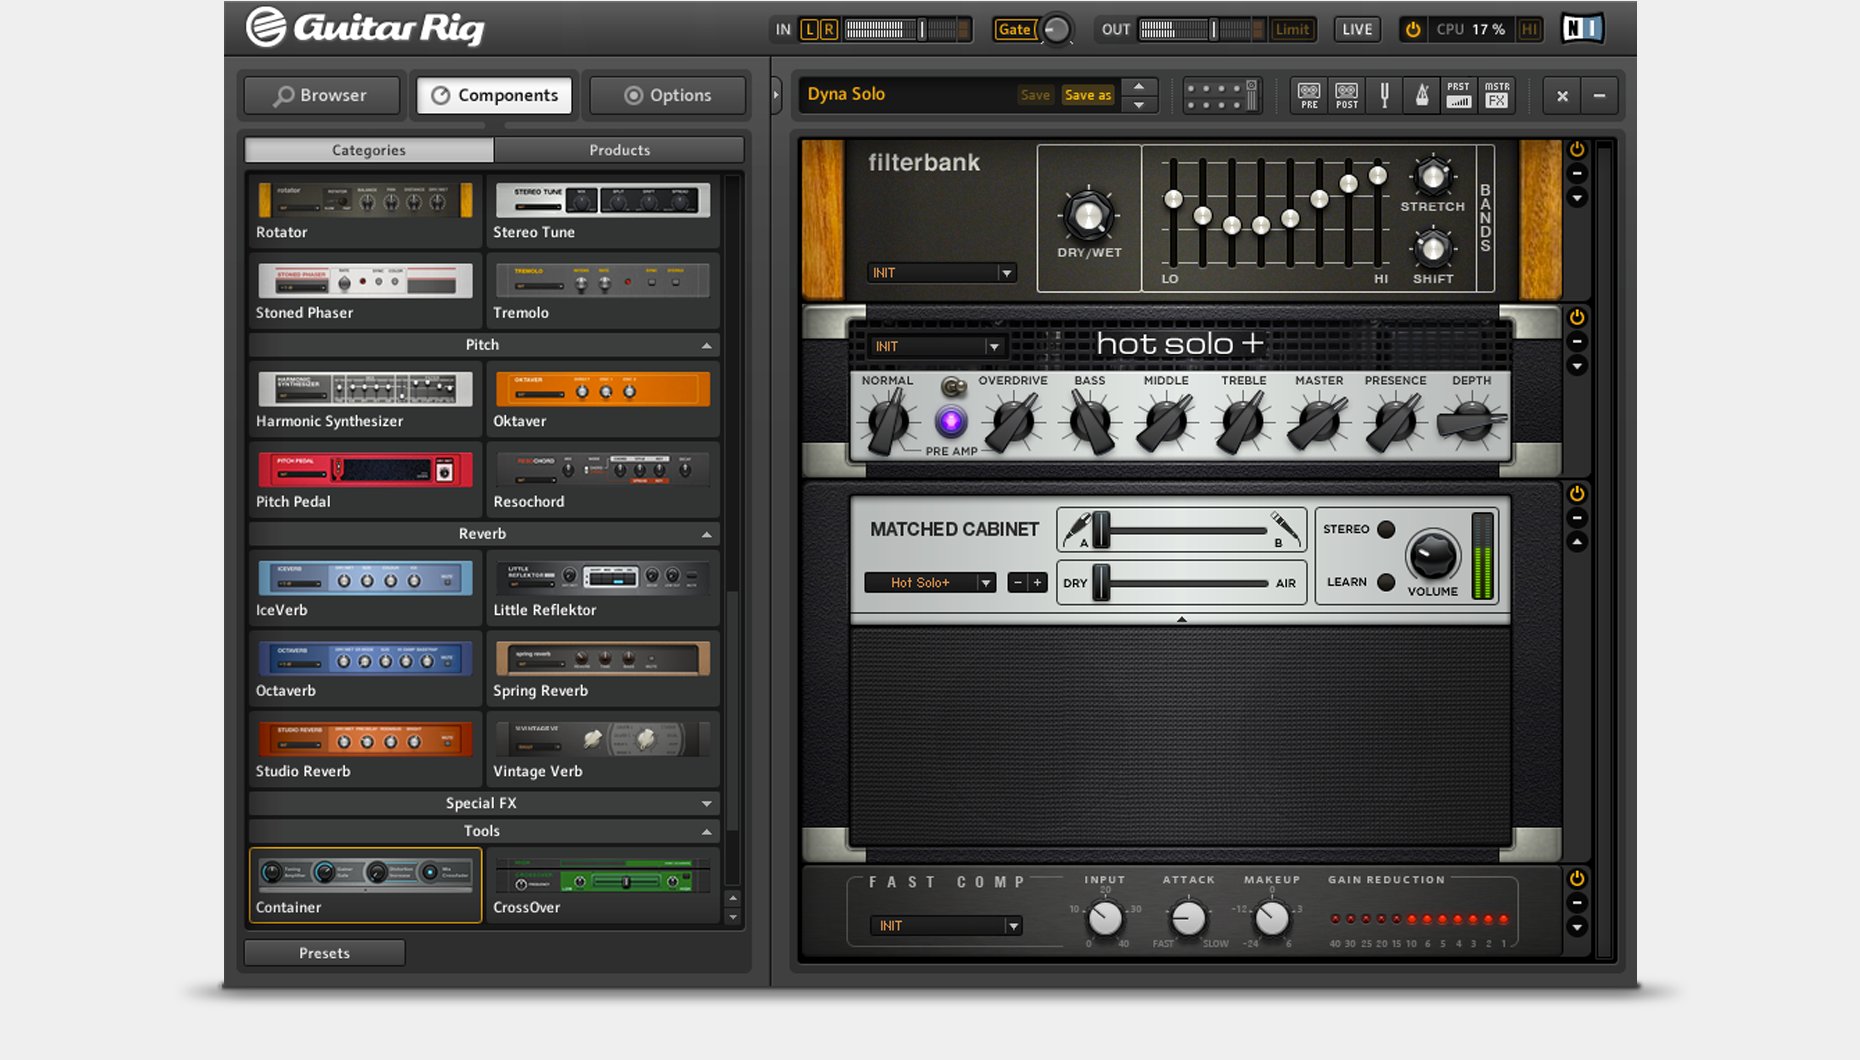 guitar rig pro free download full version pc